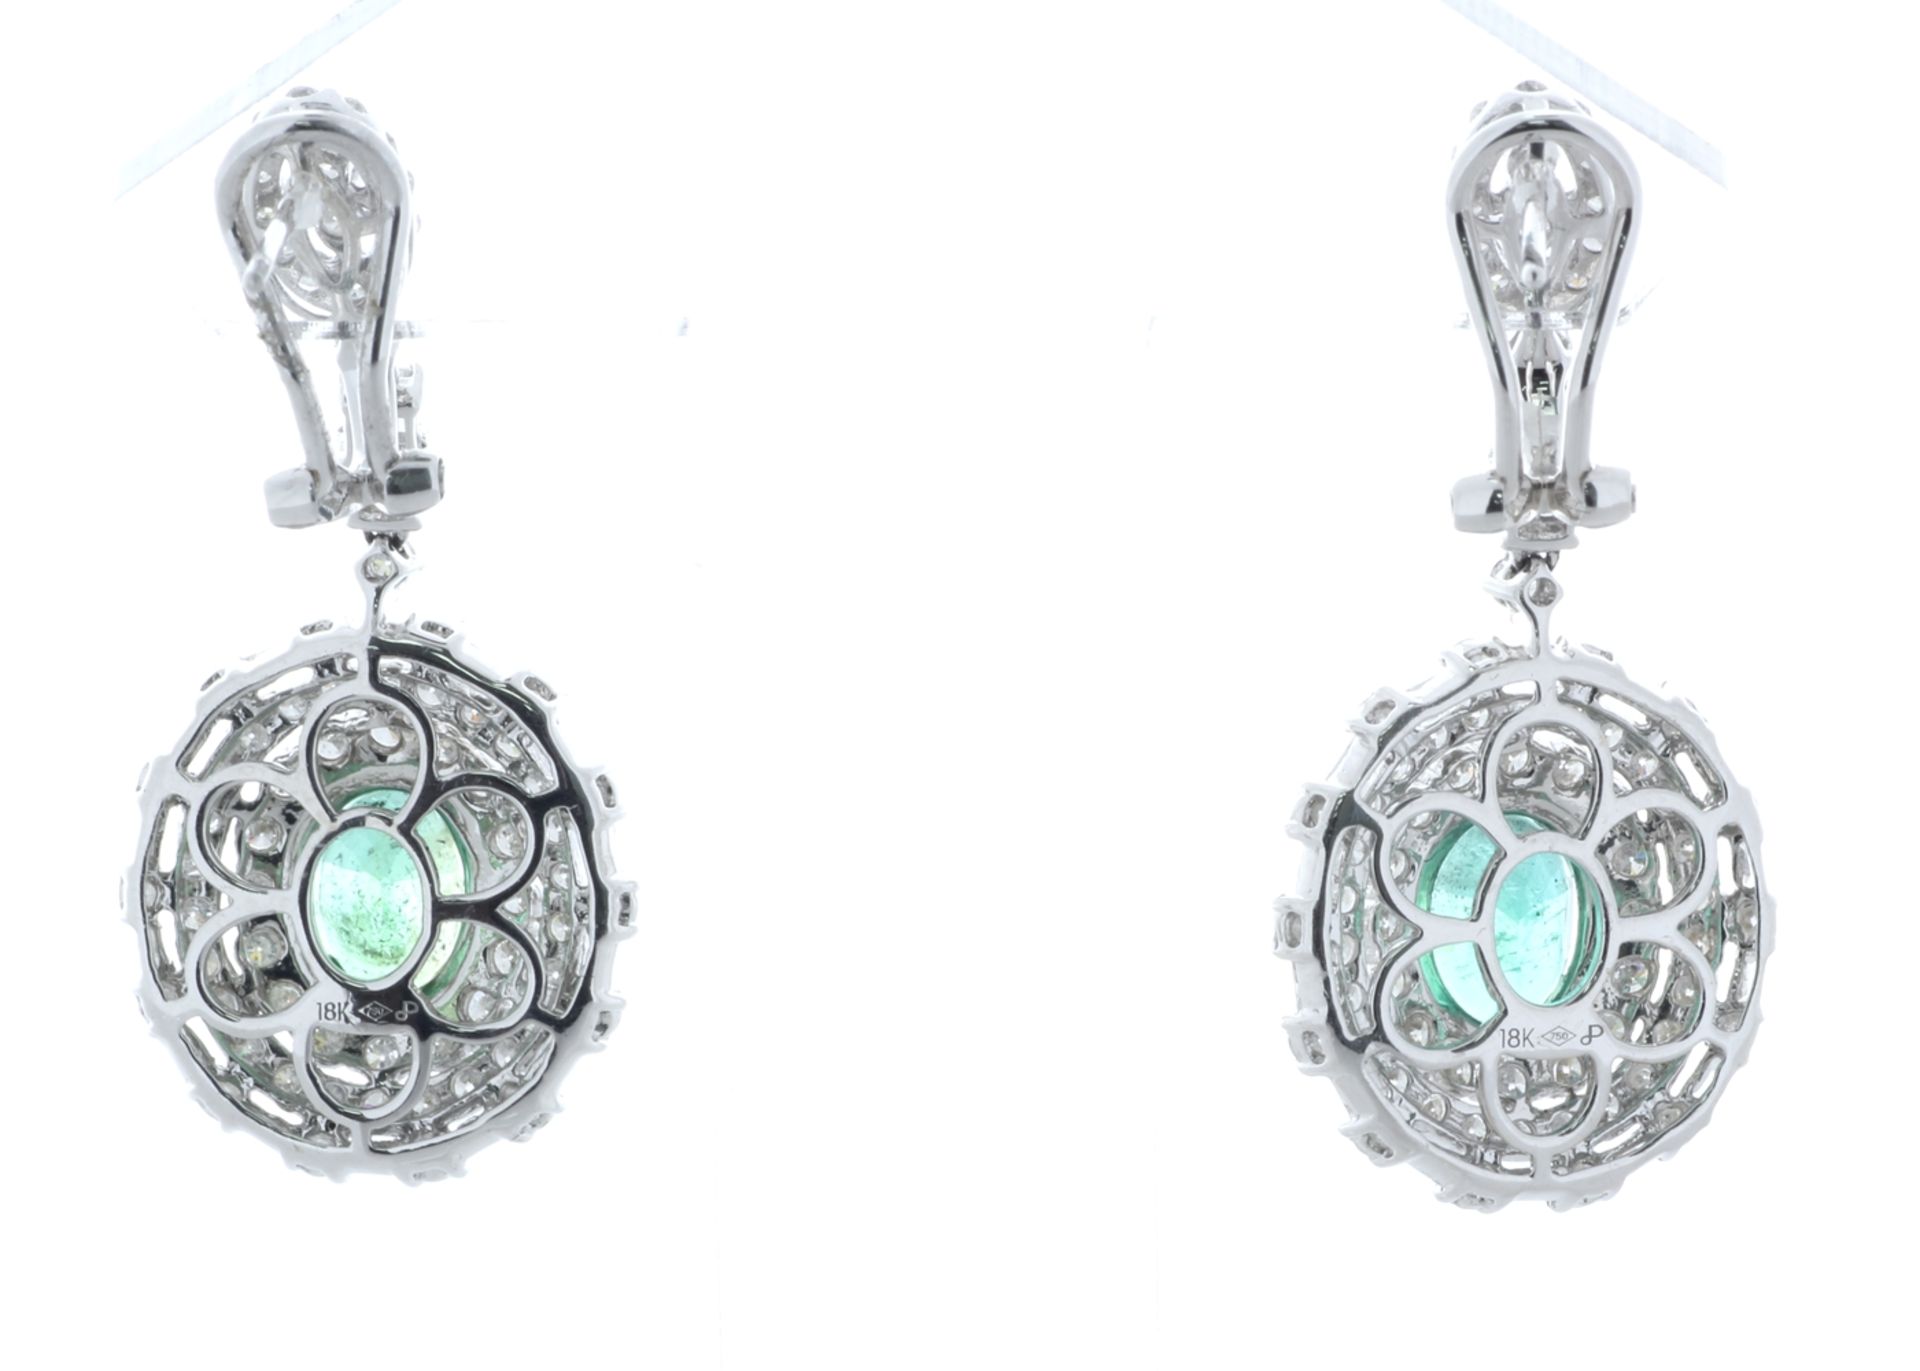 18ct White Gold Diamond And Emerald Drop Earrings (E2.61) 3.74 Carats - Valued by IDI £18,000.00 - - Image 3 of 5